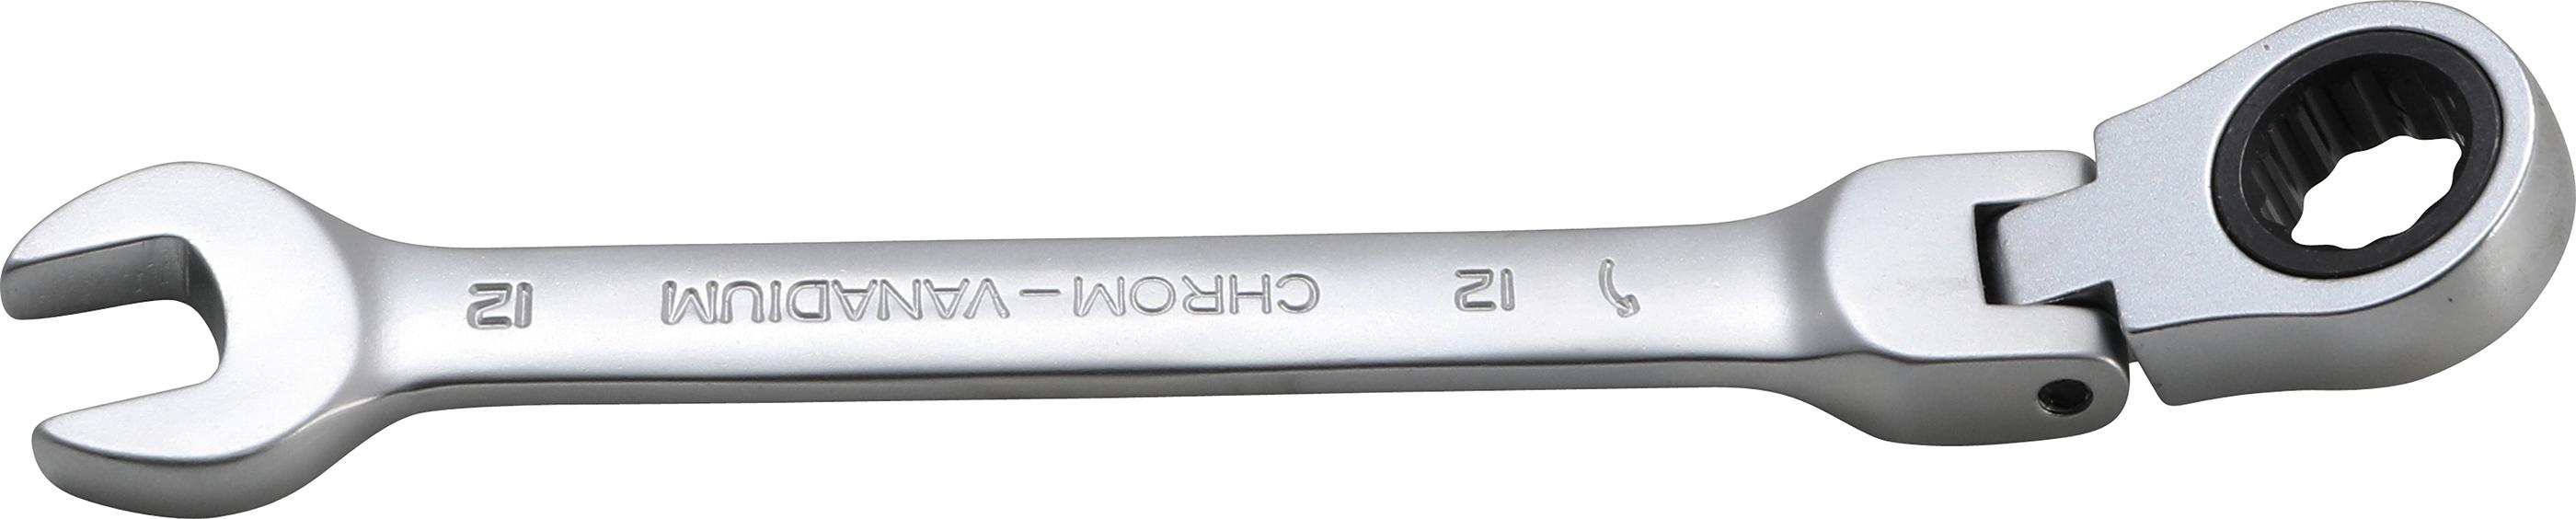 Ratchet Combination Wrench | adjustable | 12 mm (6712)